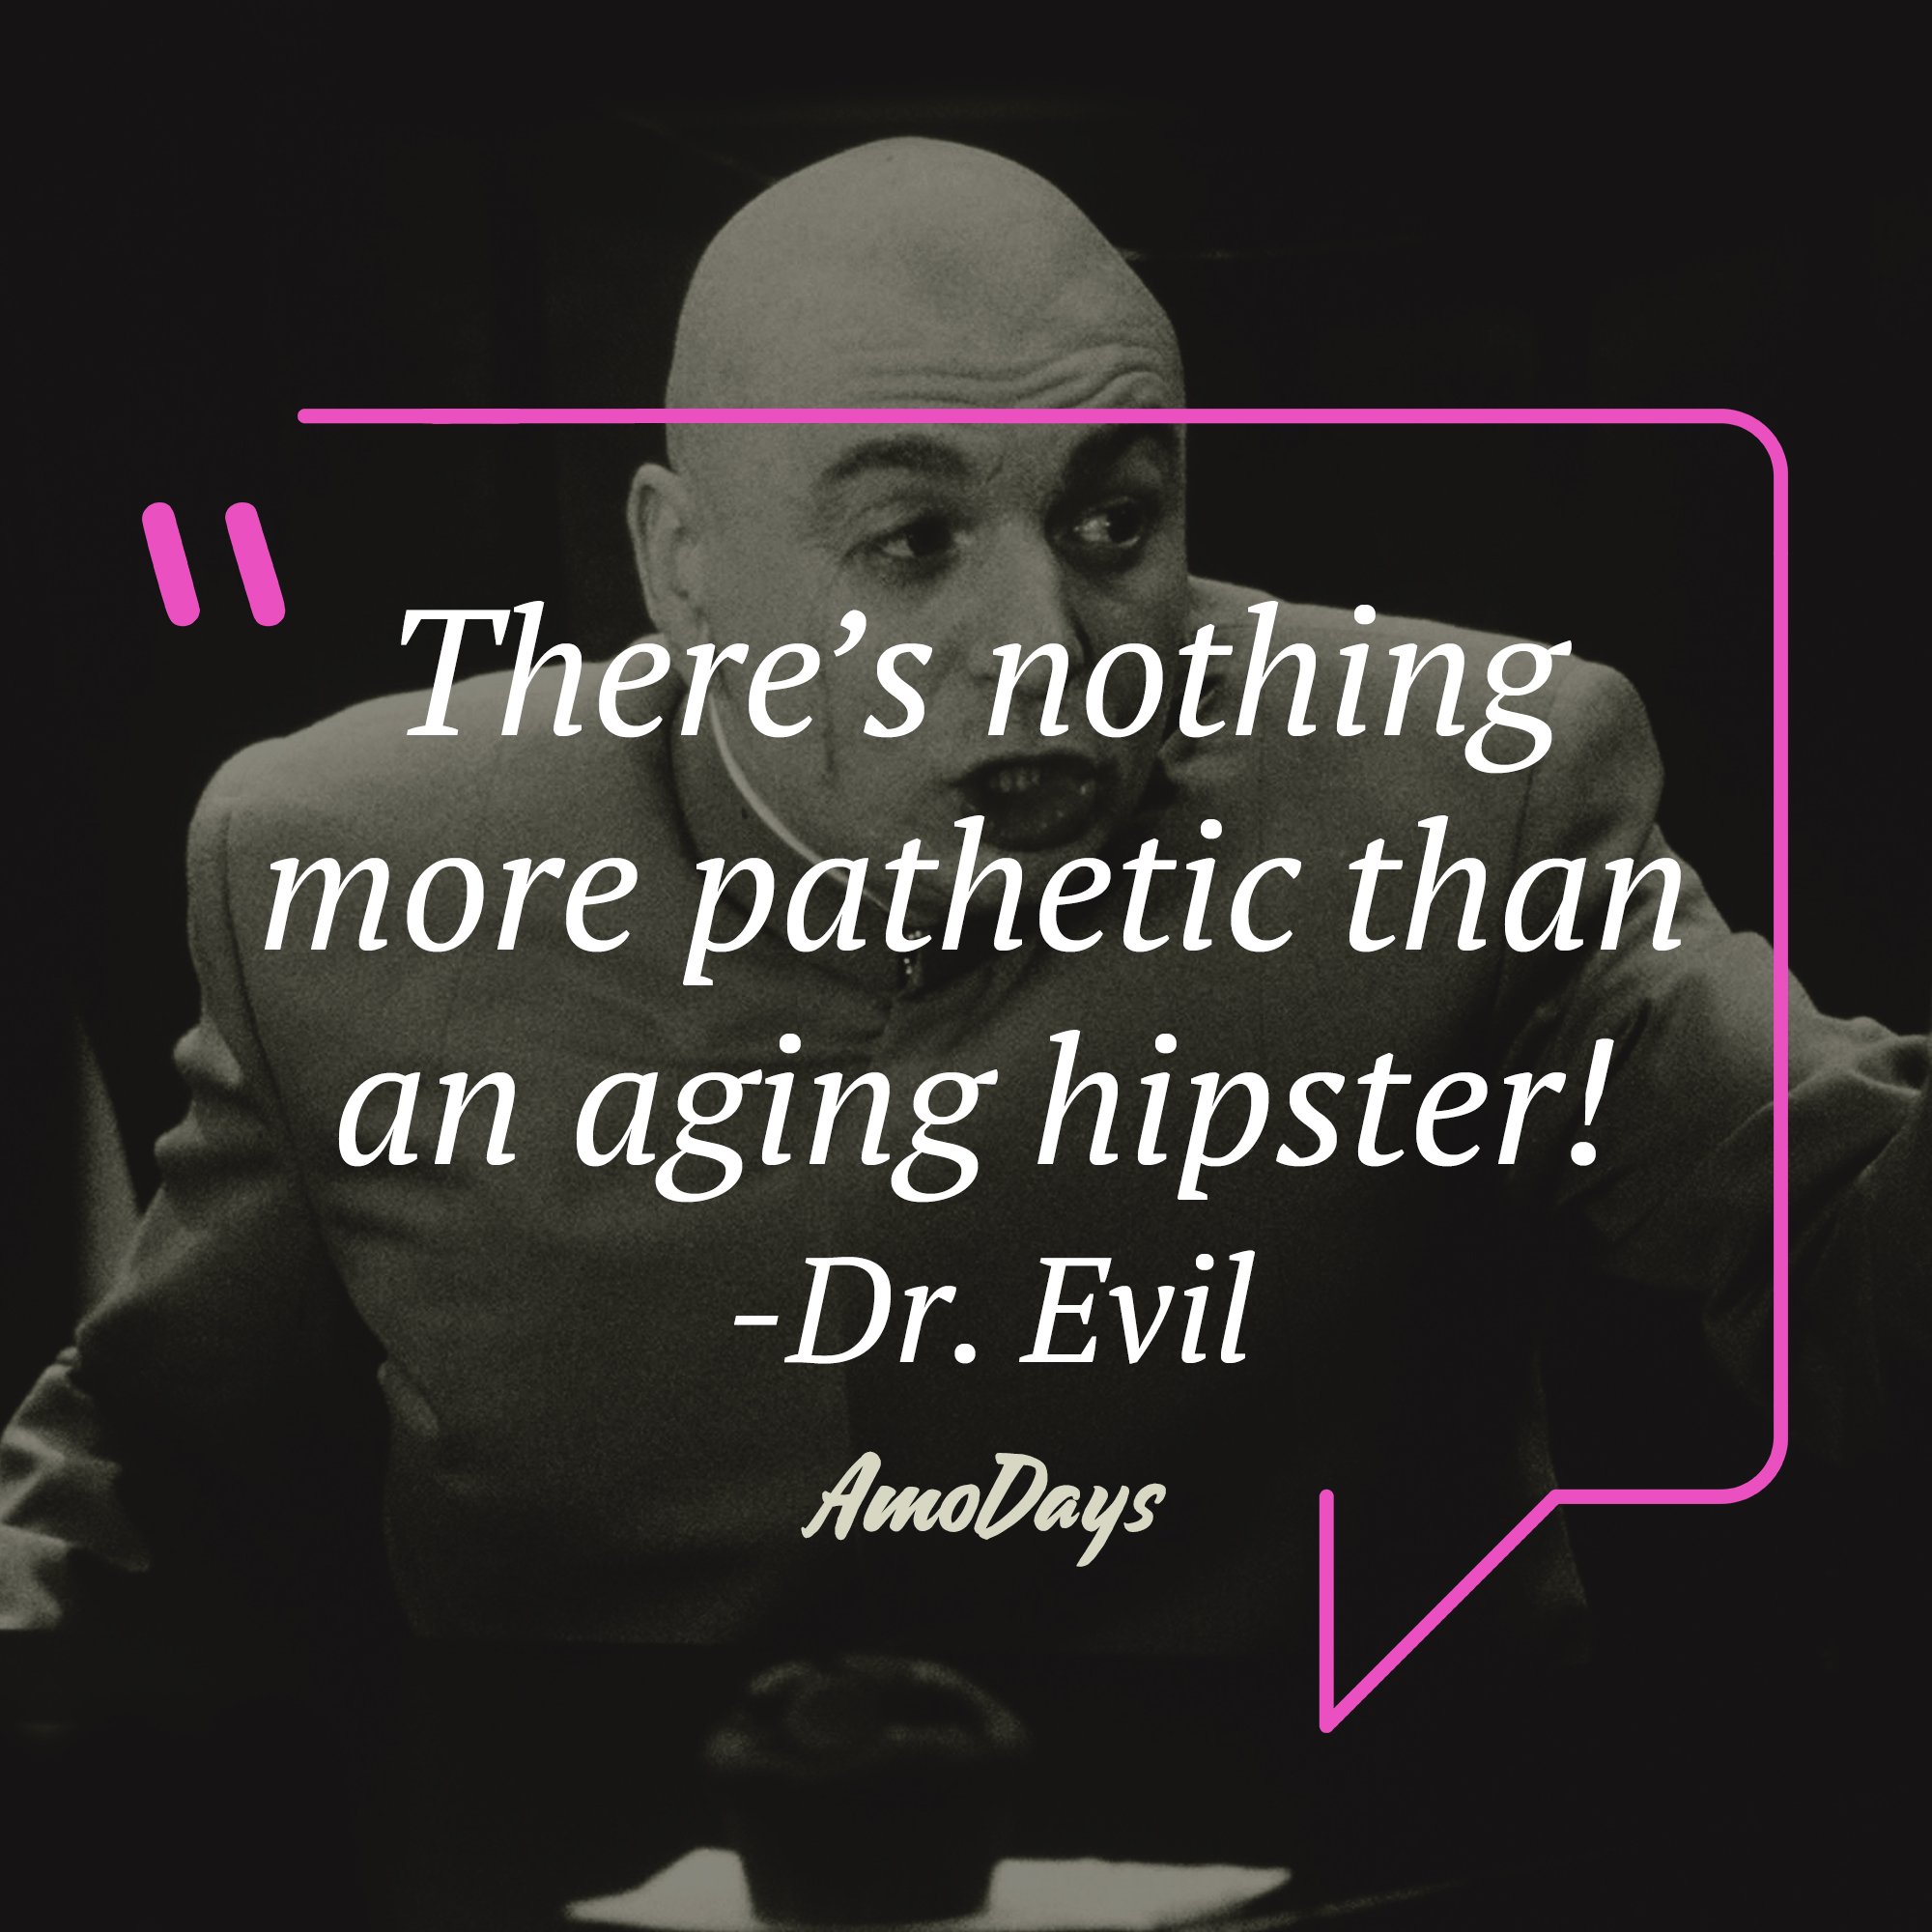 Dr. Evil'a quote: “There’s nothing more pathetic than an aging hipster!” | Image: AmoDays